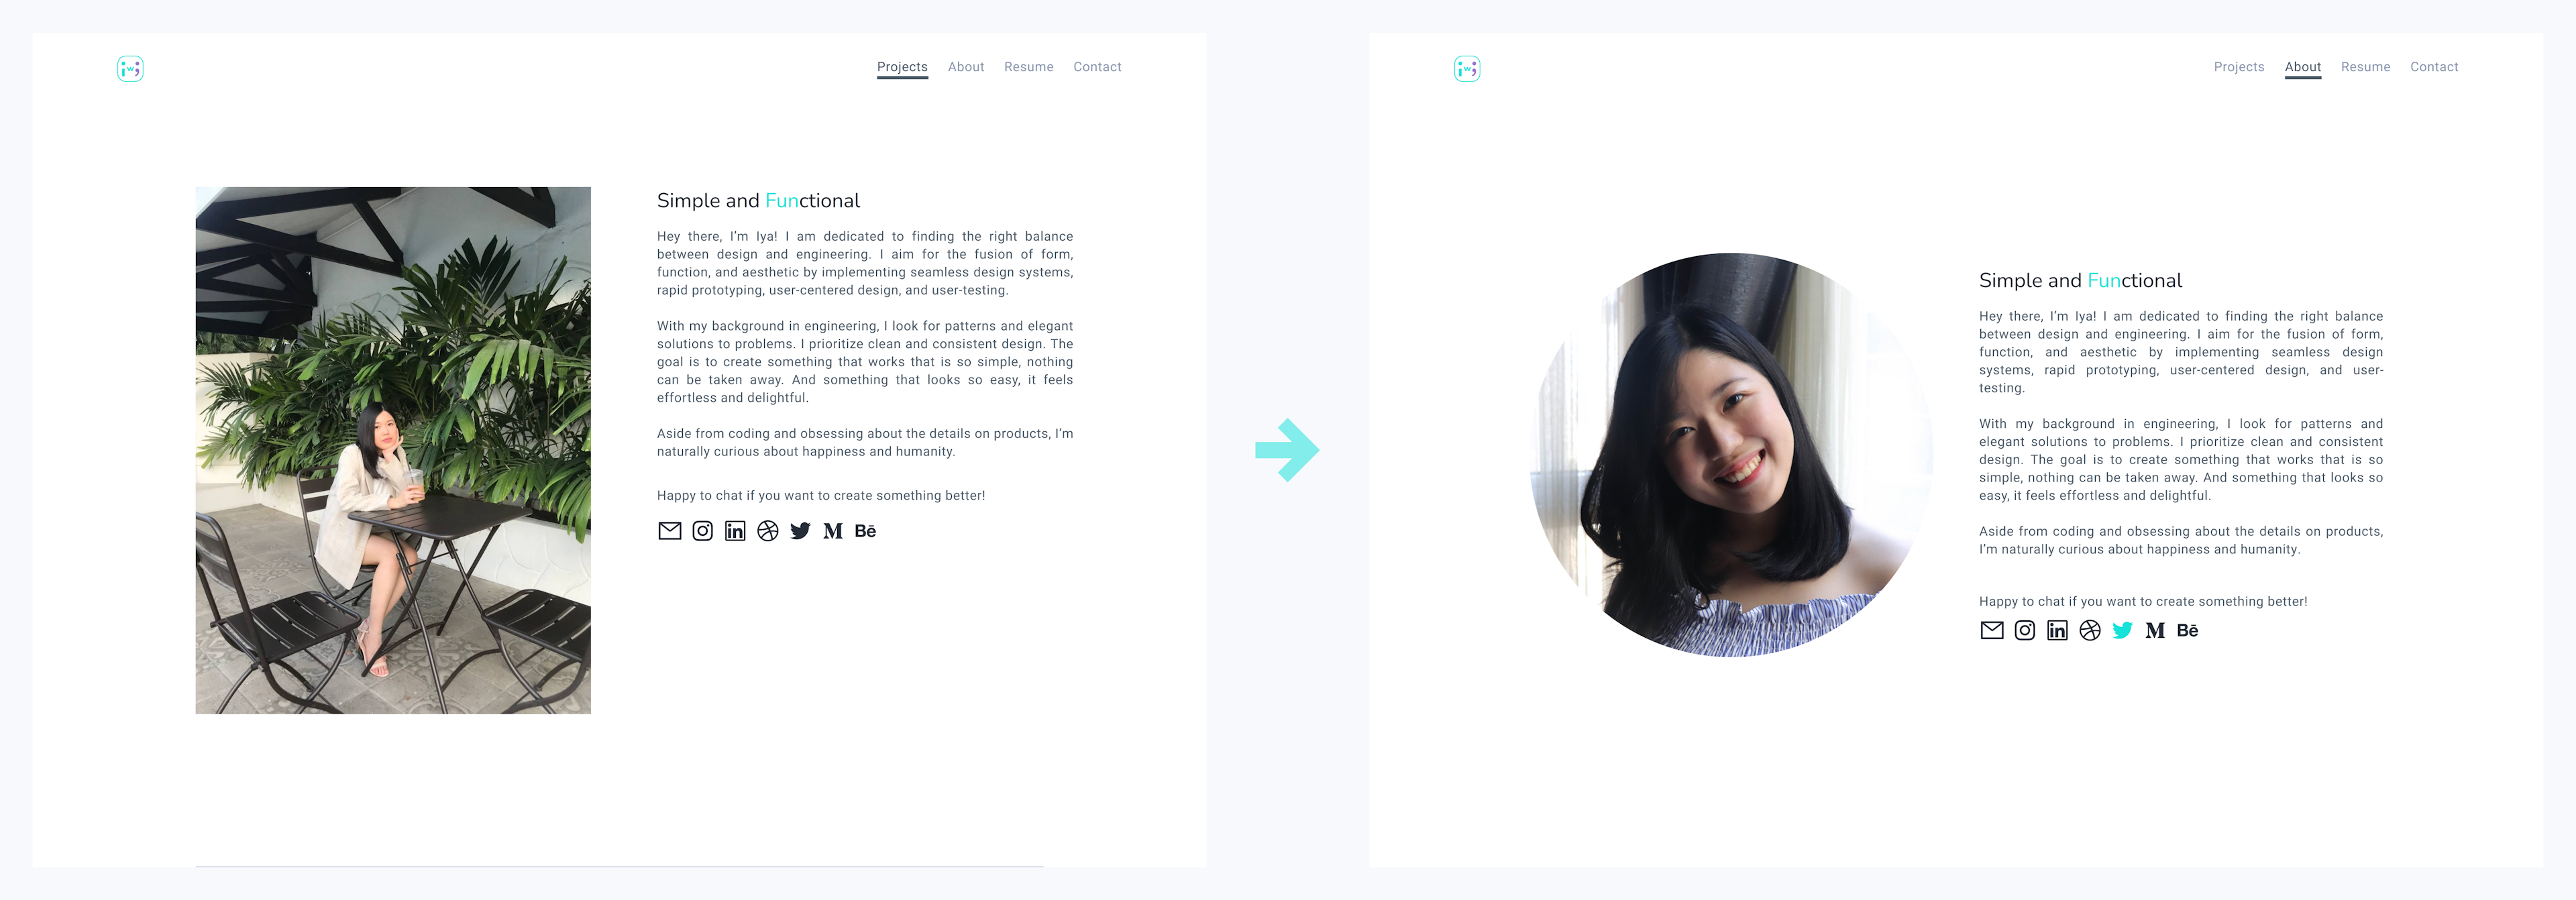 Image shows two versions of my portrait in the about page. The first one is rendered in a rectangular frame. The second one is placed in a circular frame and looks more casual.